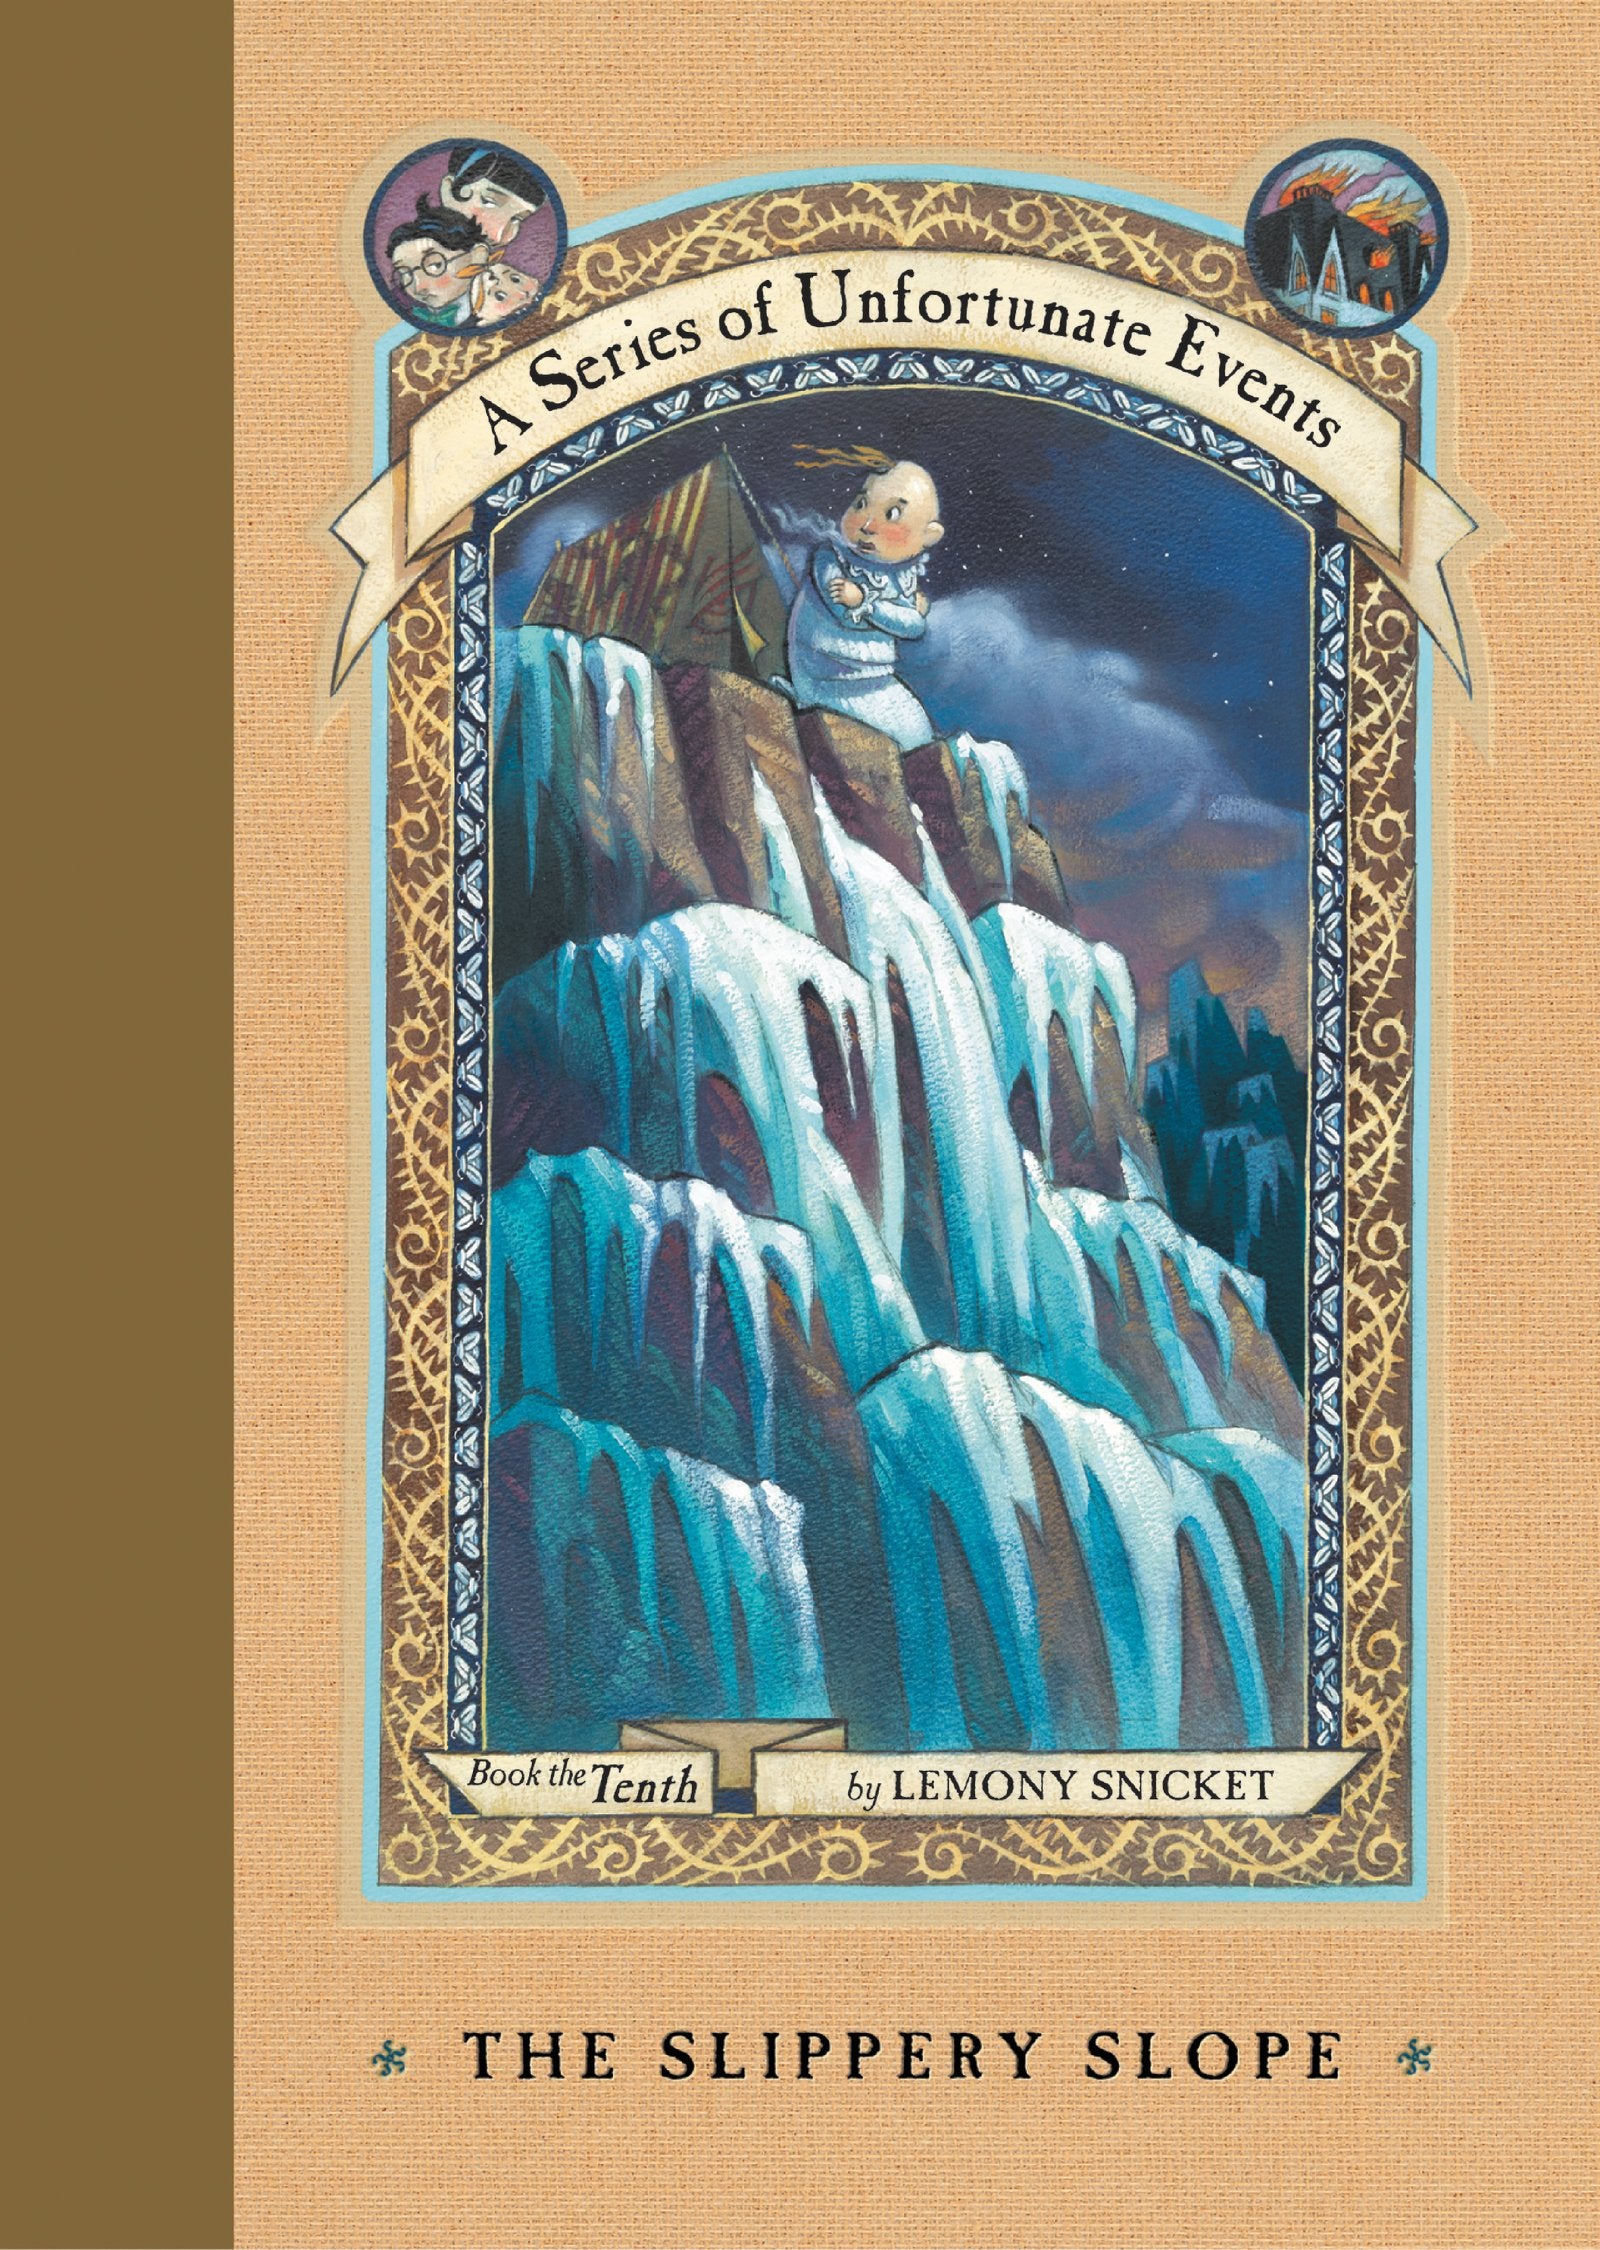 A Series of Unfortunate Events # 10 : The Slippery Slope - Lemony Snicket